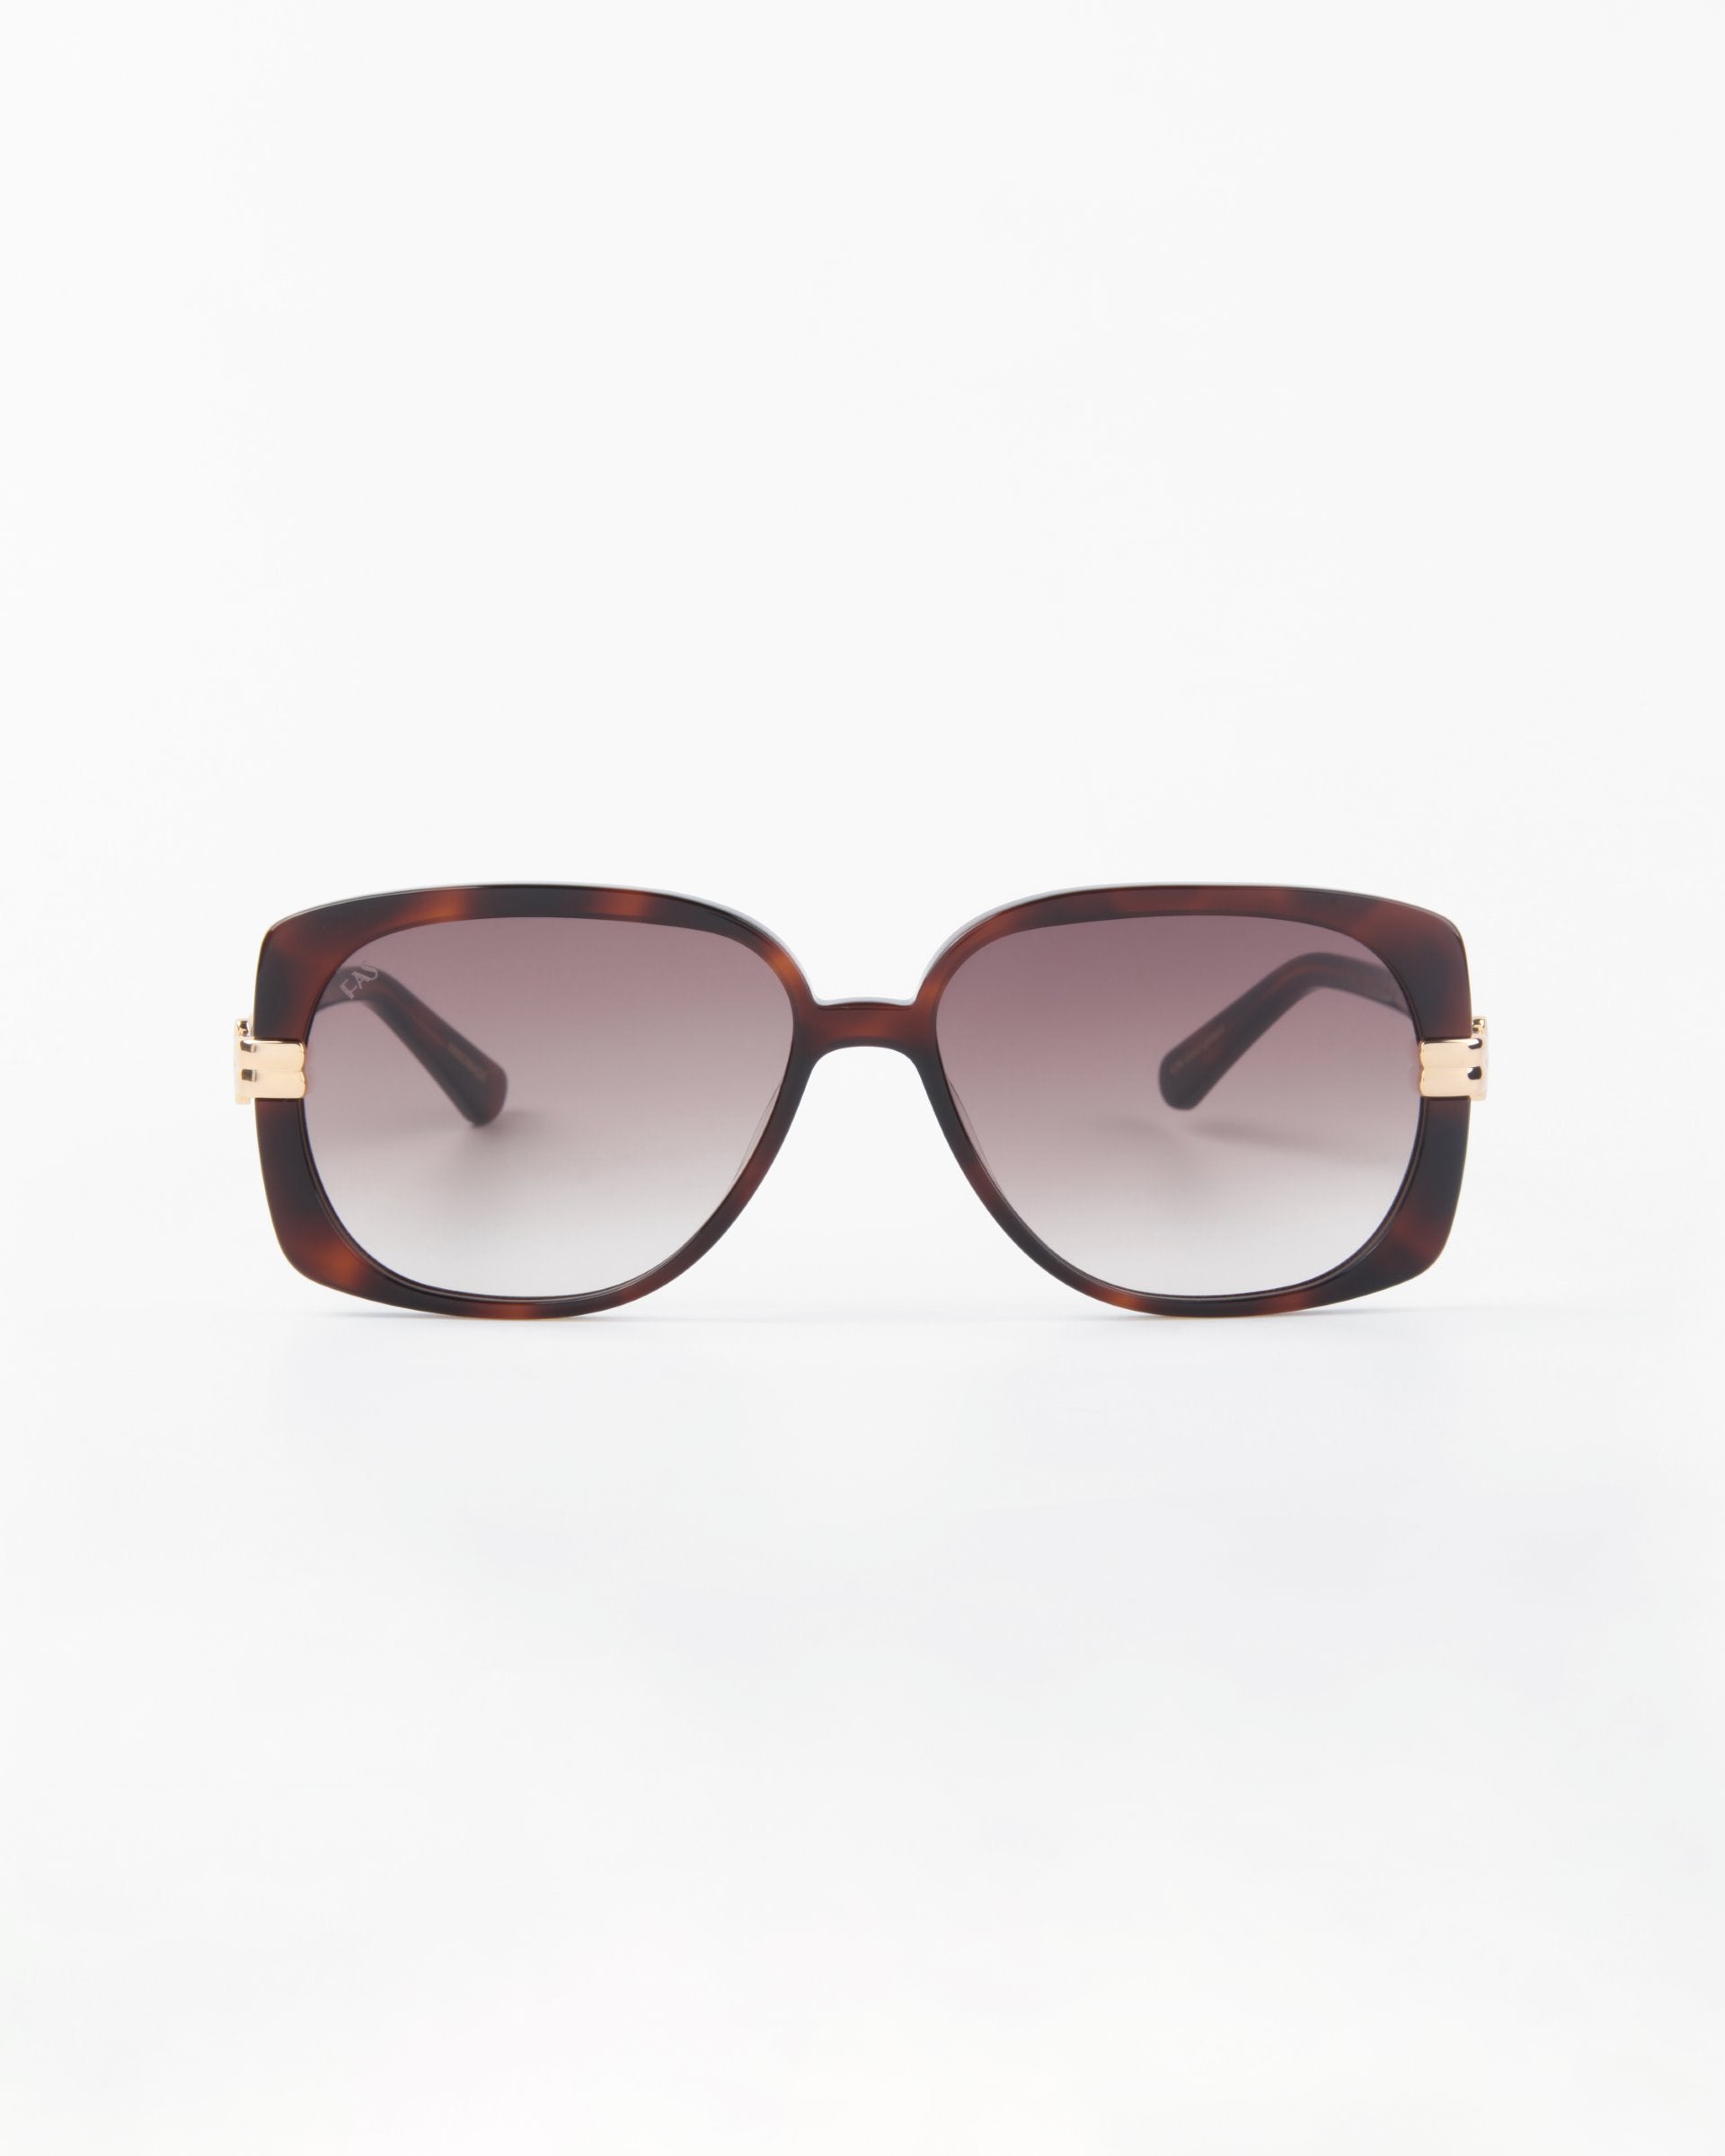 A pair of stylish, oversized Icon sunglasses with rectangular frames in a dark tortoiseshell pattern from For Art&#39;s Sake®. Handmade with shatter-resistant nylon lenses, they feature gradient lenses and small gold accents on the temples. The UVA &amp; UVB-protected sunglasses are set against a plain white background.